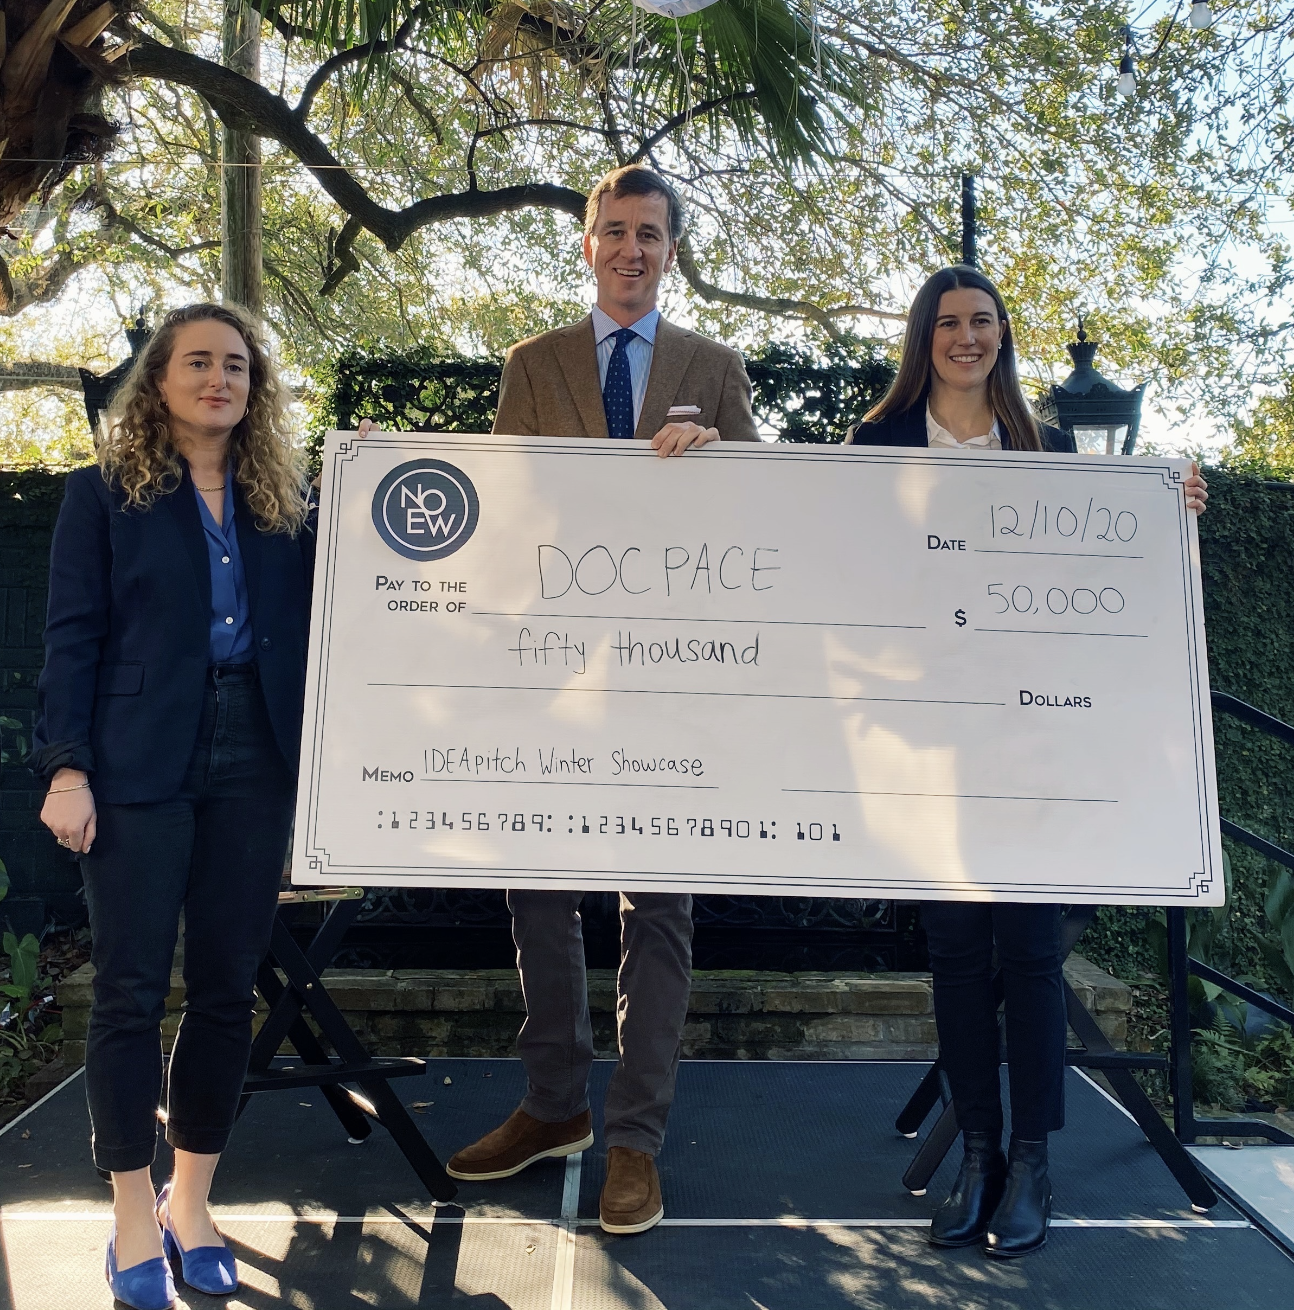 $50,000 AWARDED TO DOCPACE AT NEW ORLEANS ENTREPRENEUR WEEK’S IDEAPITCH WINTER SHOWCASE